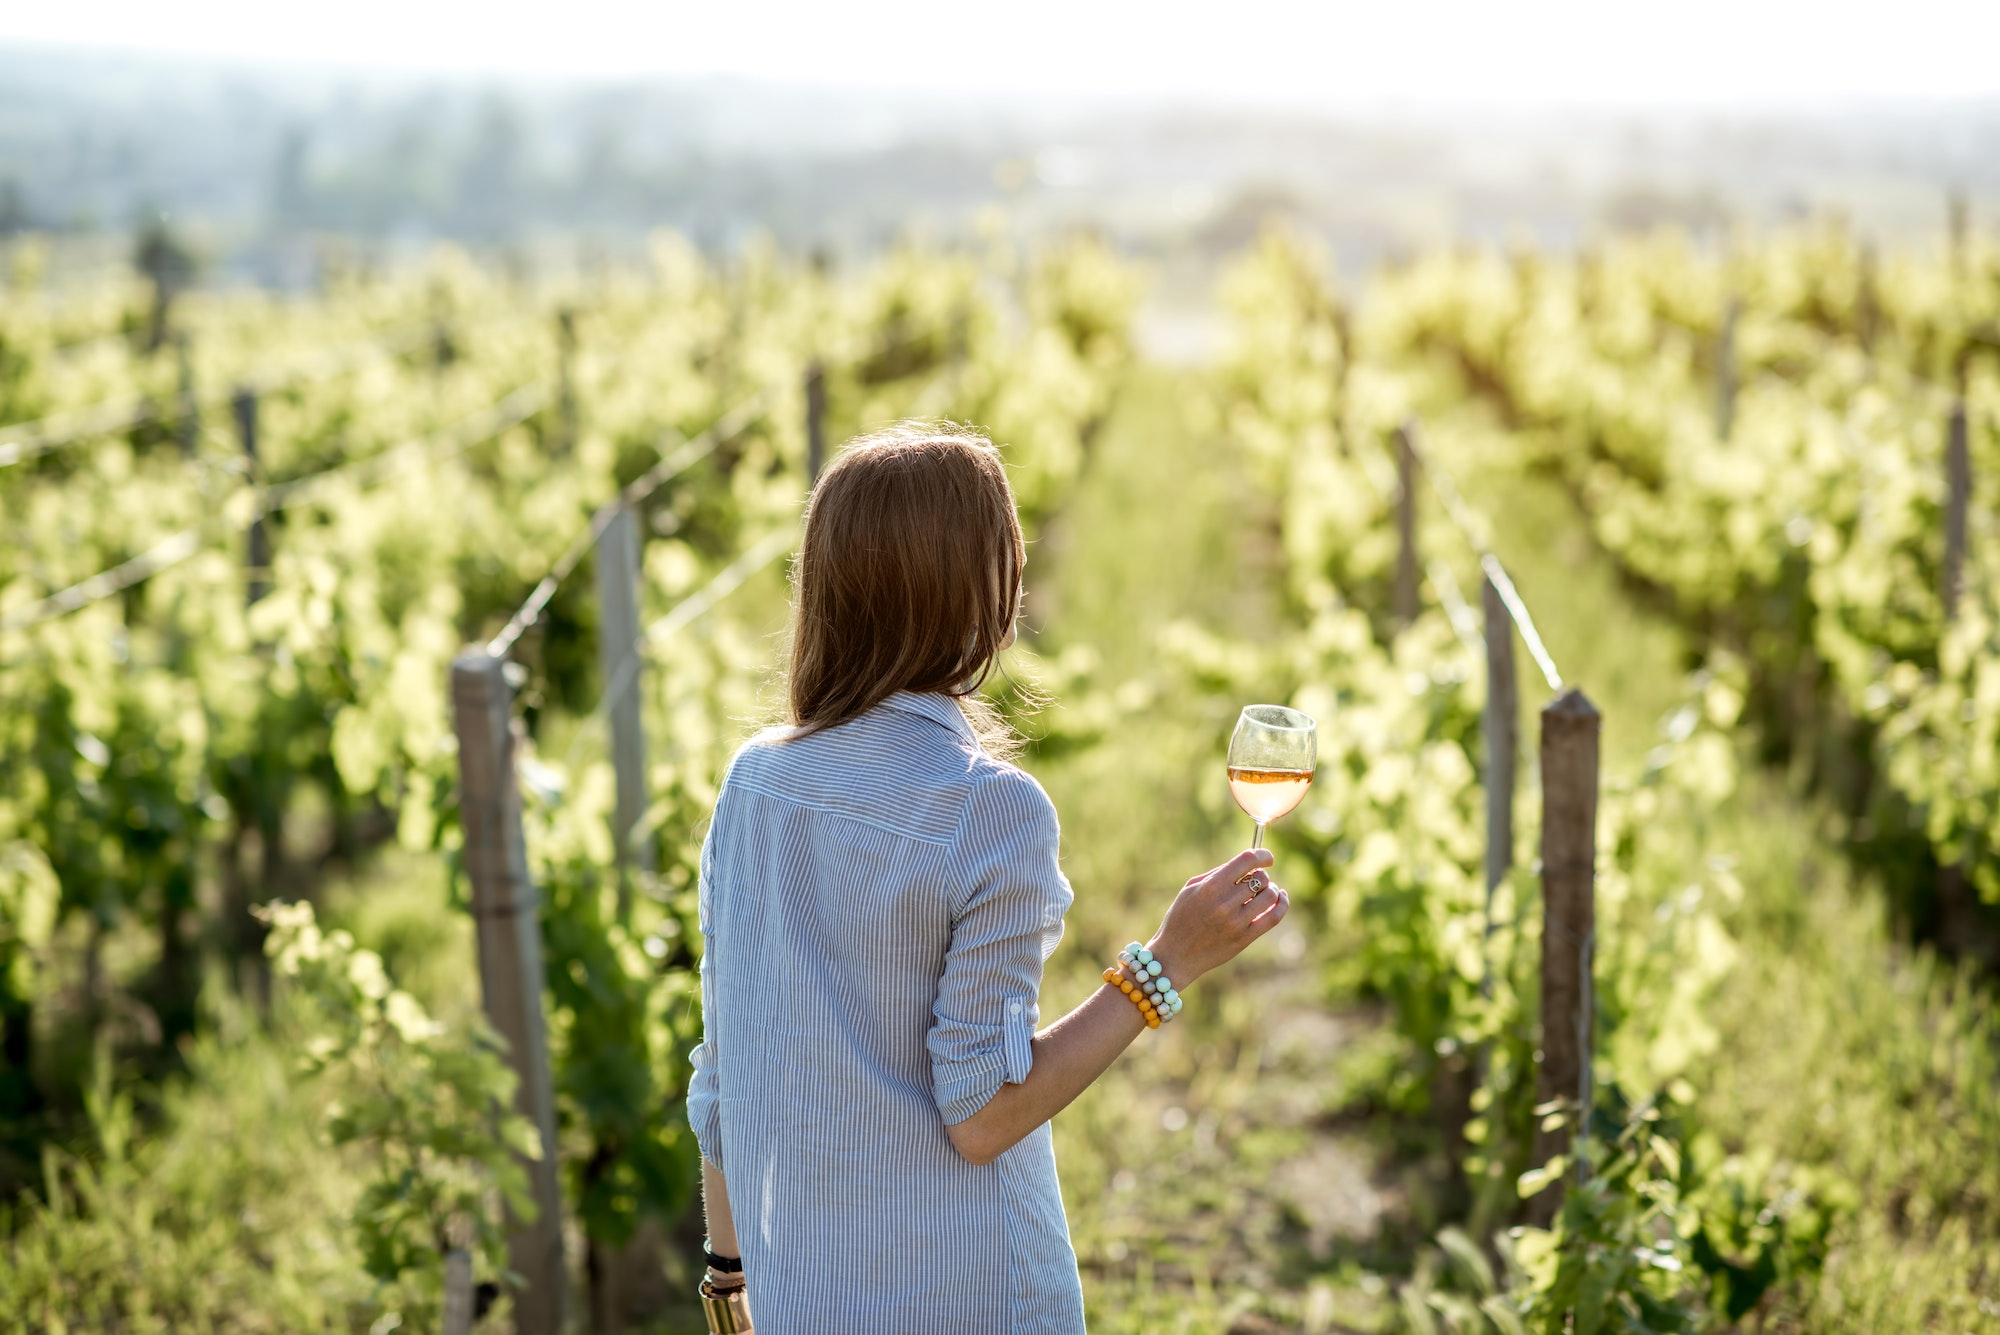 Terroir as an Important Aspect in French Winemaking